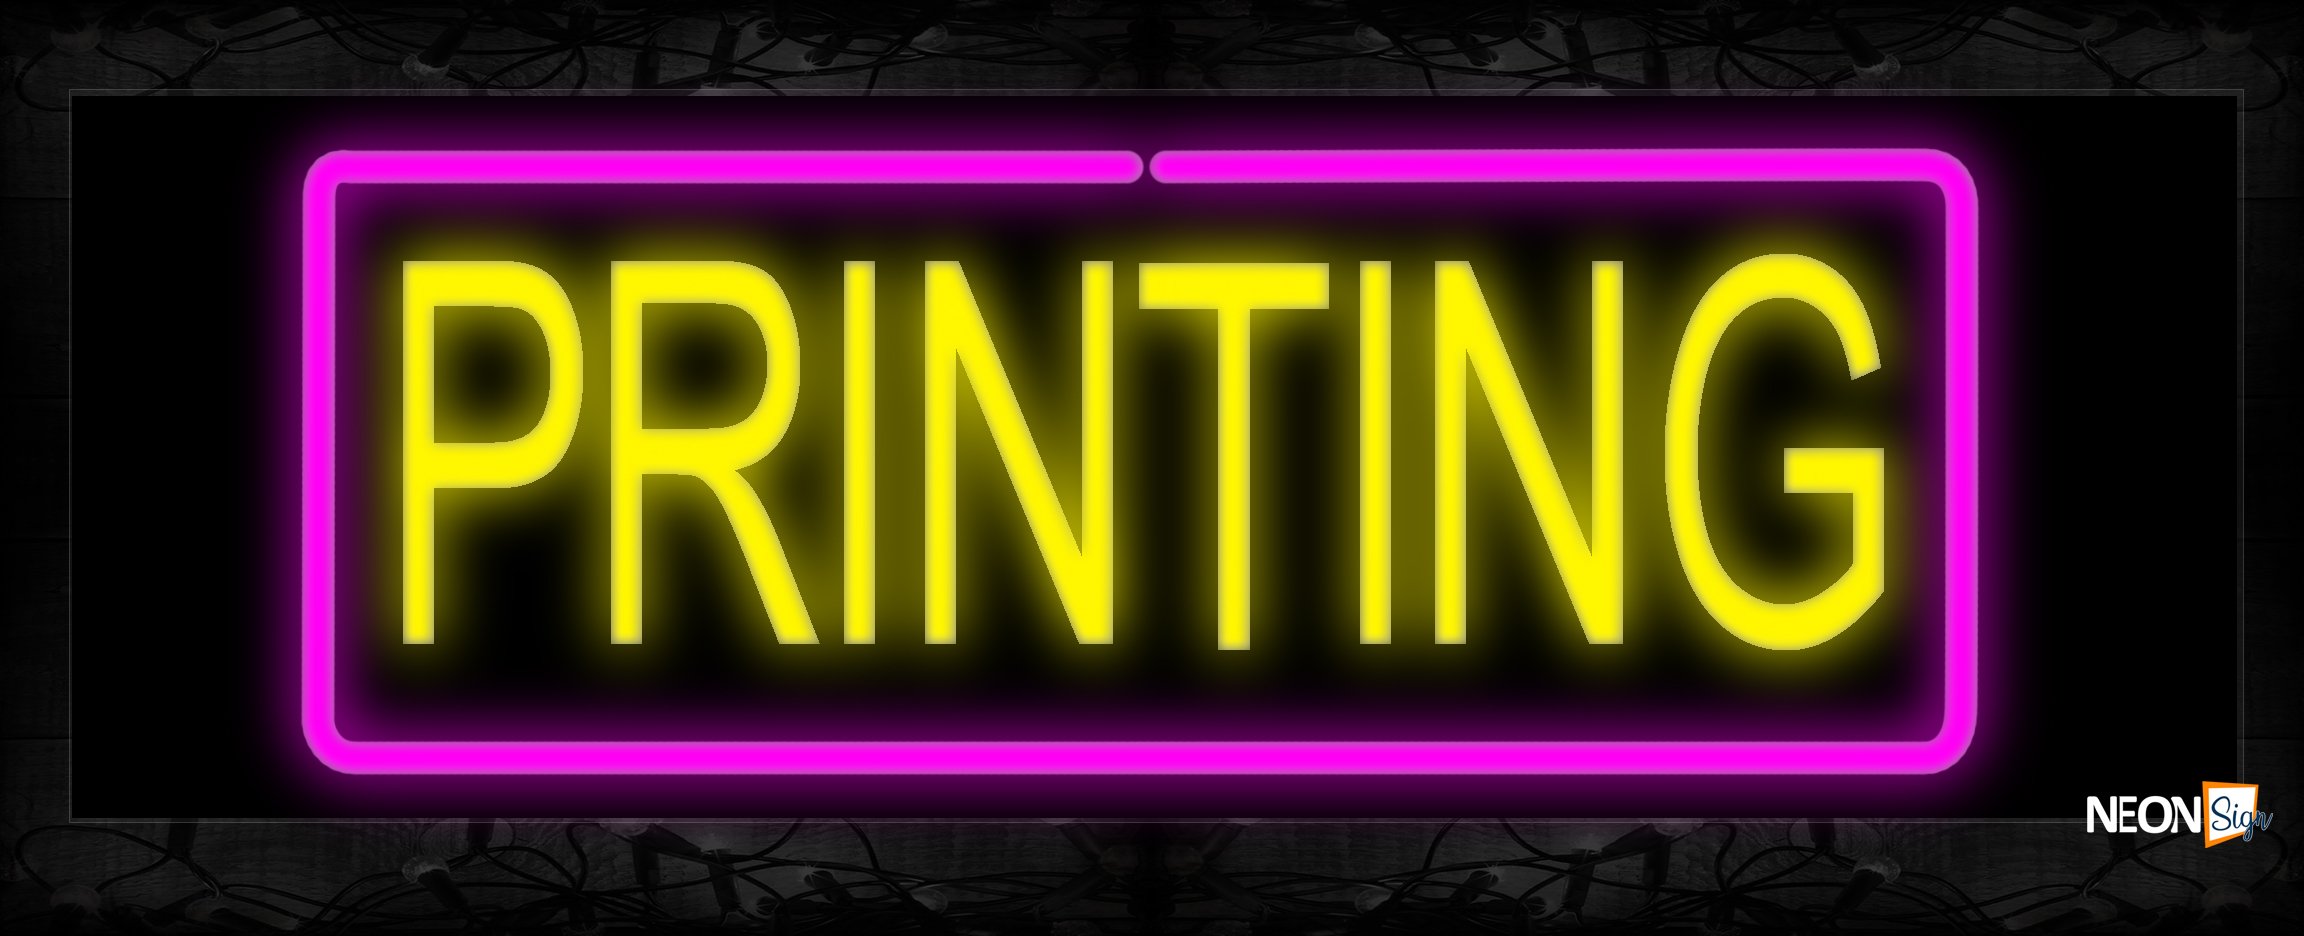 Image of 10612 Printing with border Neon Sign 13x32 Black Backing